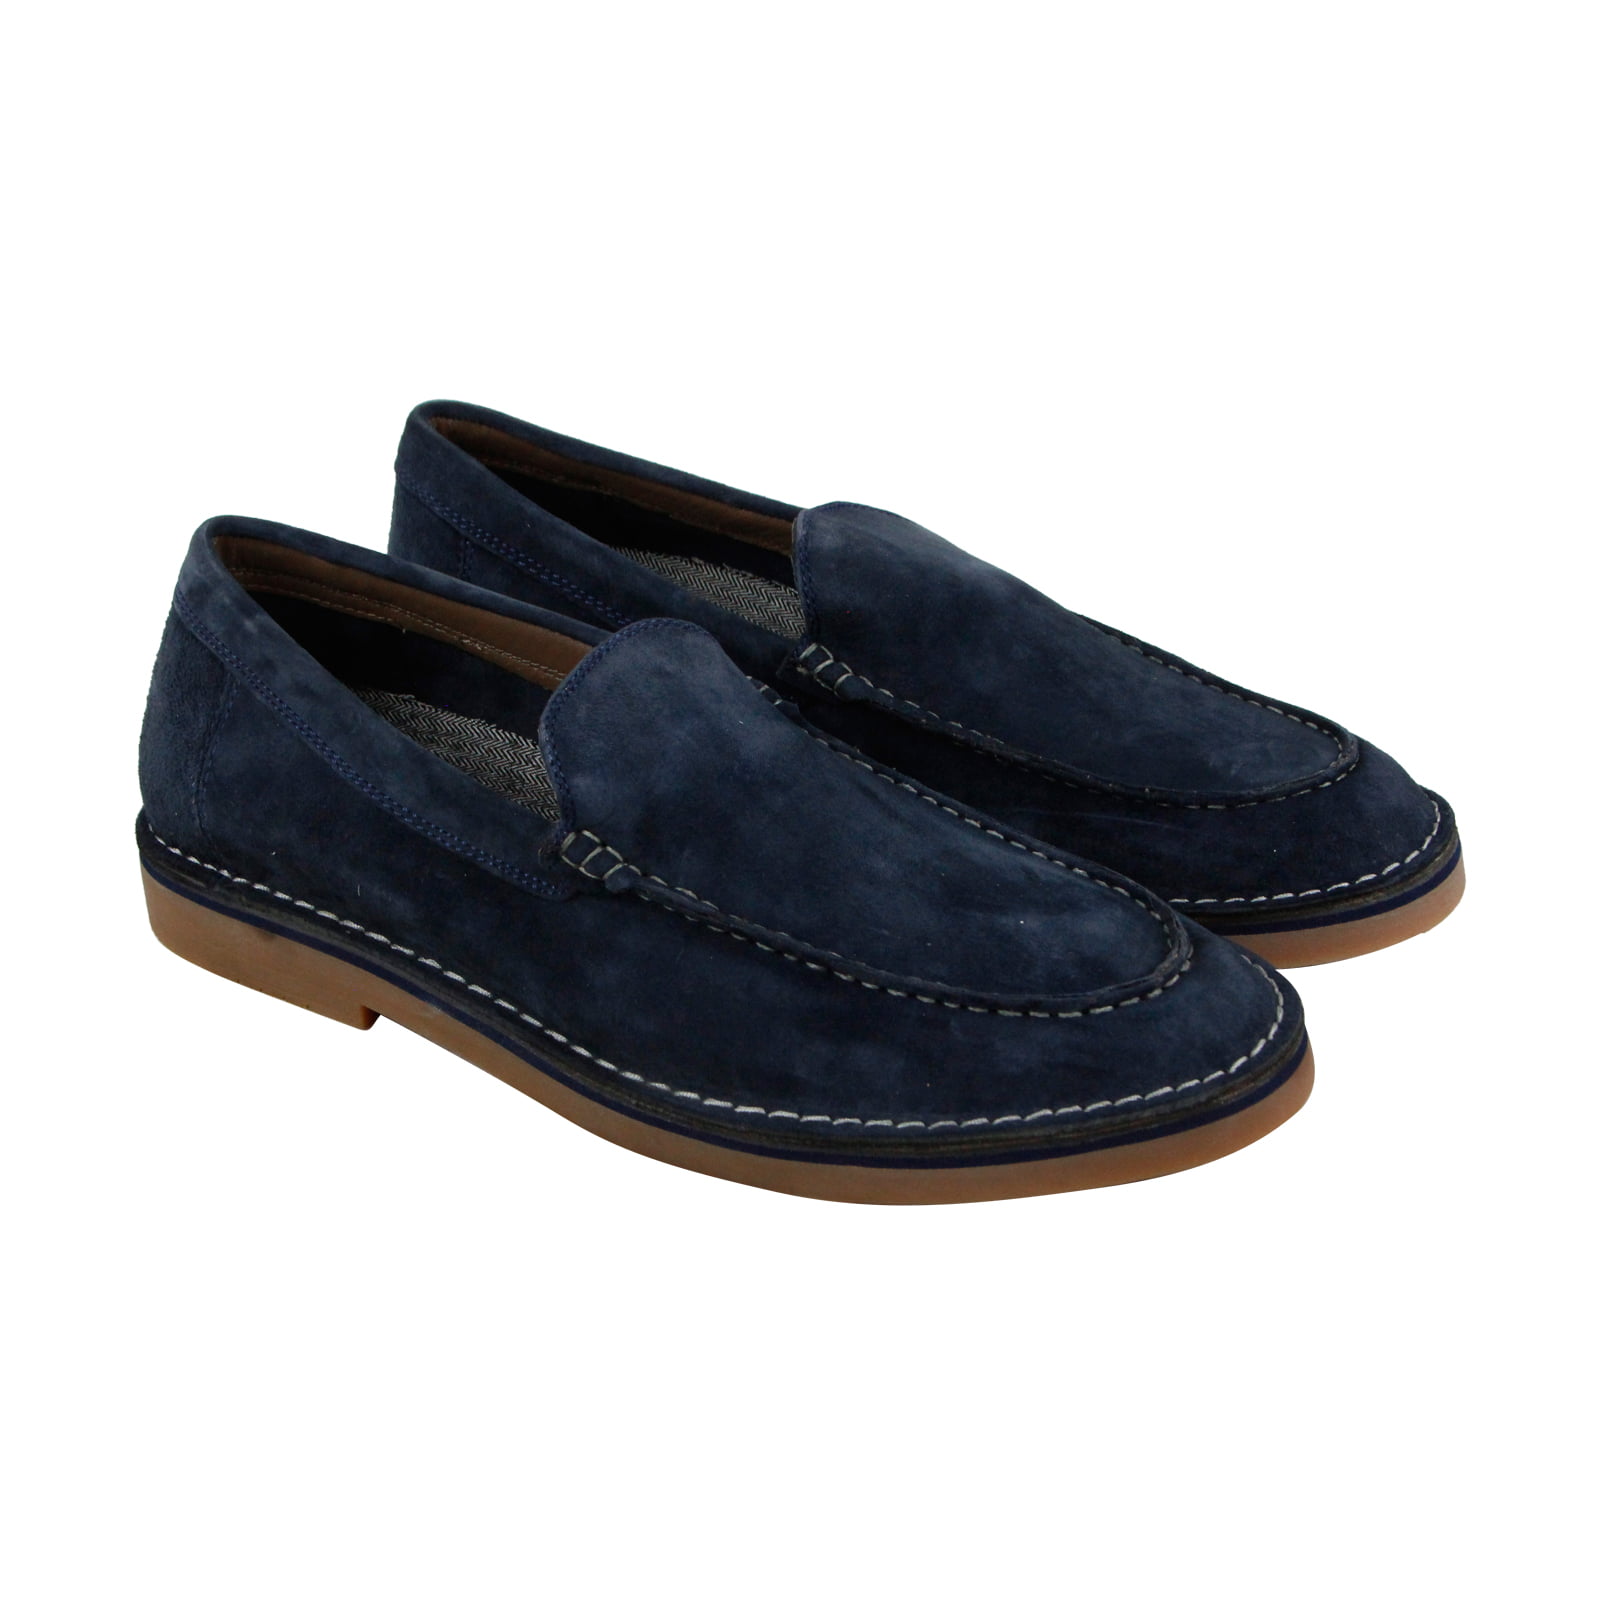 Hush Puppies - Hush Puppies Presdient Mercer Mens Blue Suede Casual ...